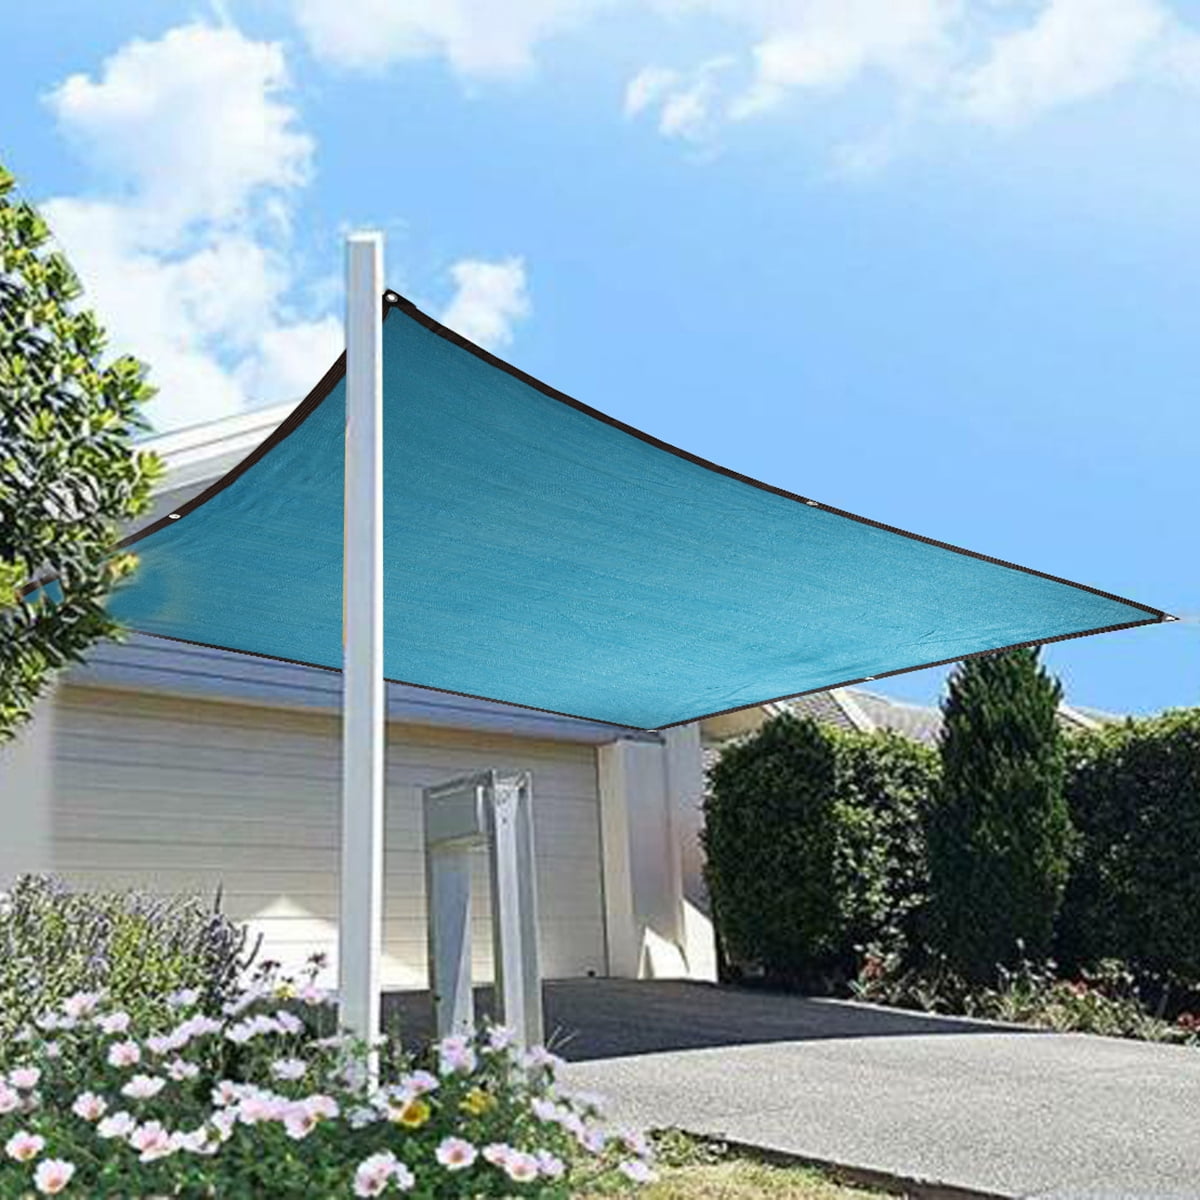 Ifenceview Green Square 14' Sun Shade Sail Pool Canopy Awning Outdoor Commercial 